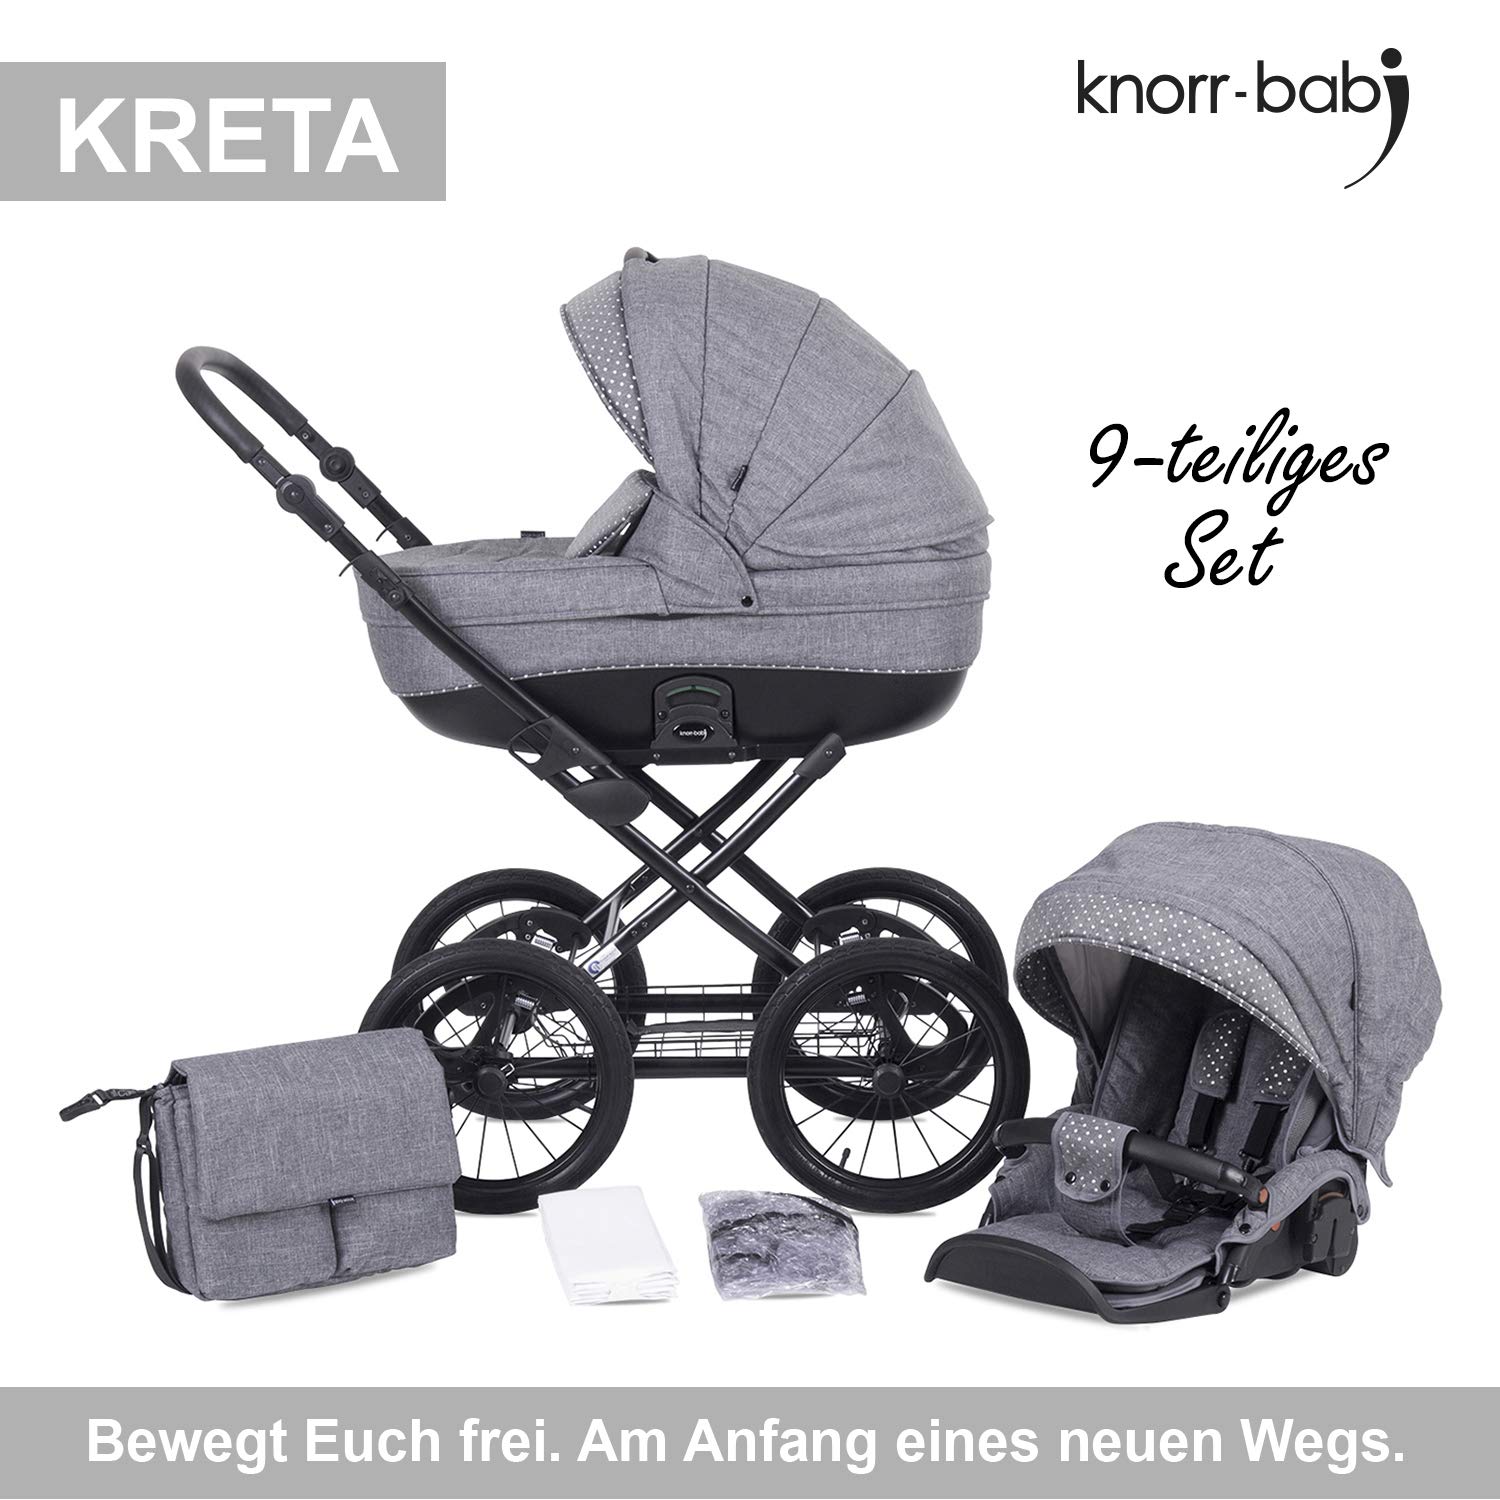 Knorr-Baby Roma 3620-01 Combi Pushchair Light Grey with Dots Grey